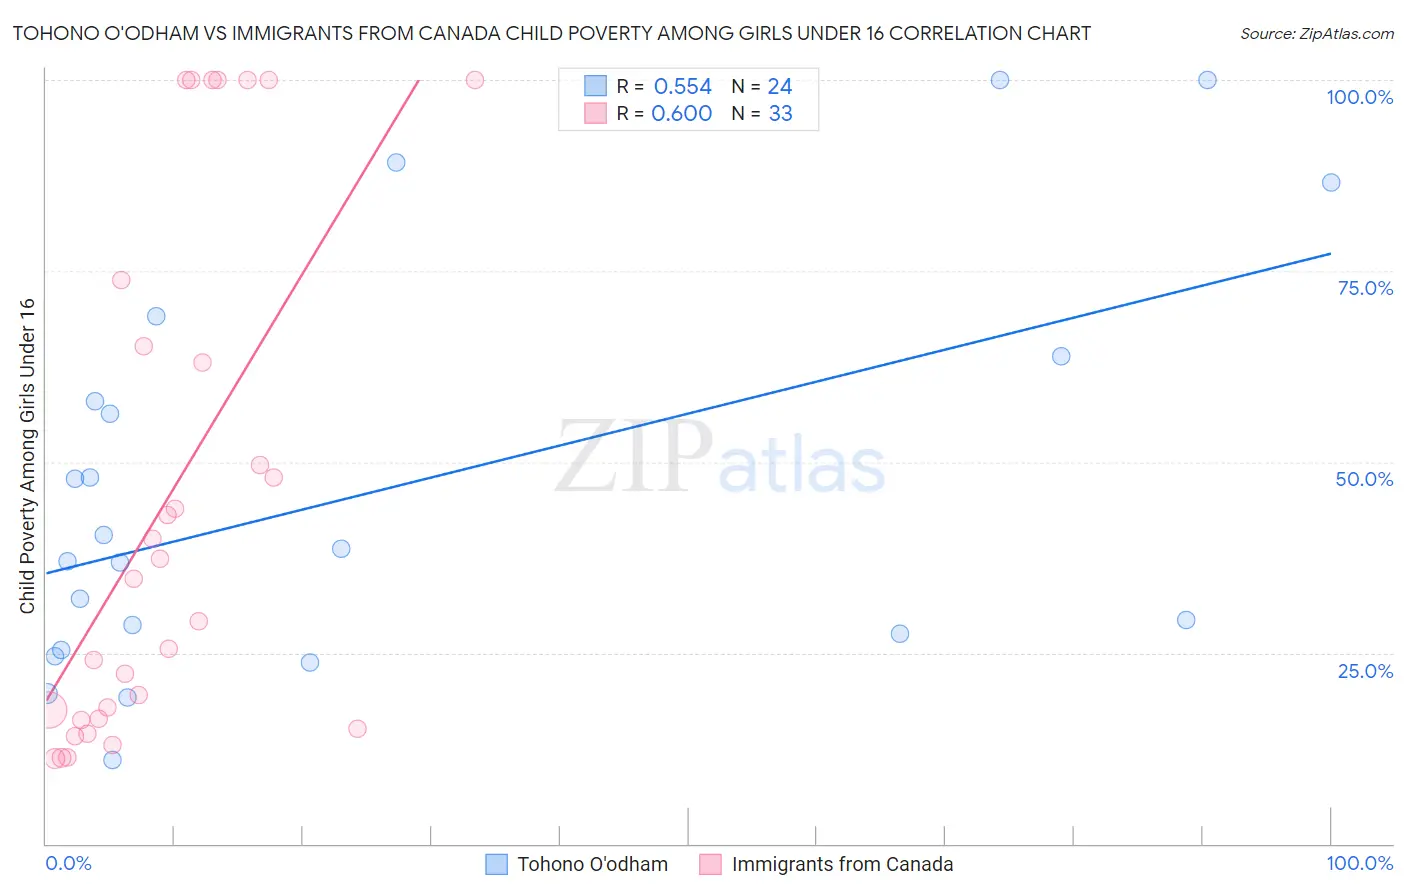 Tohono O'odham vs Immigrants from Canada Child Poverty Among Girls Under 16